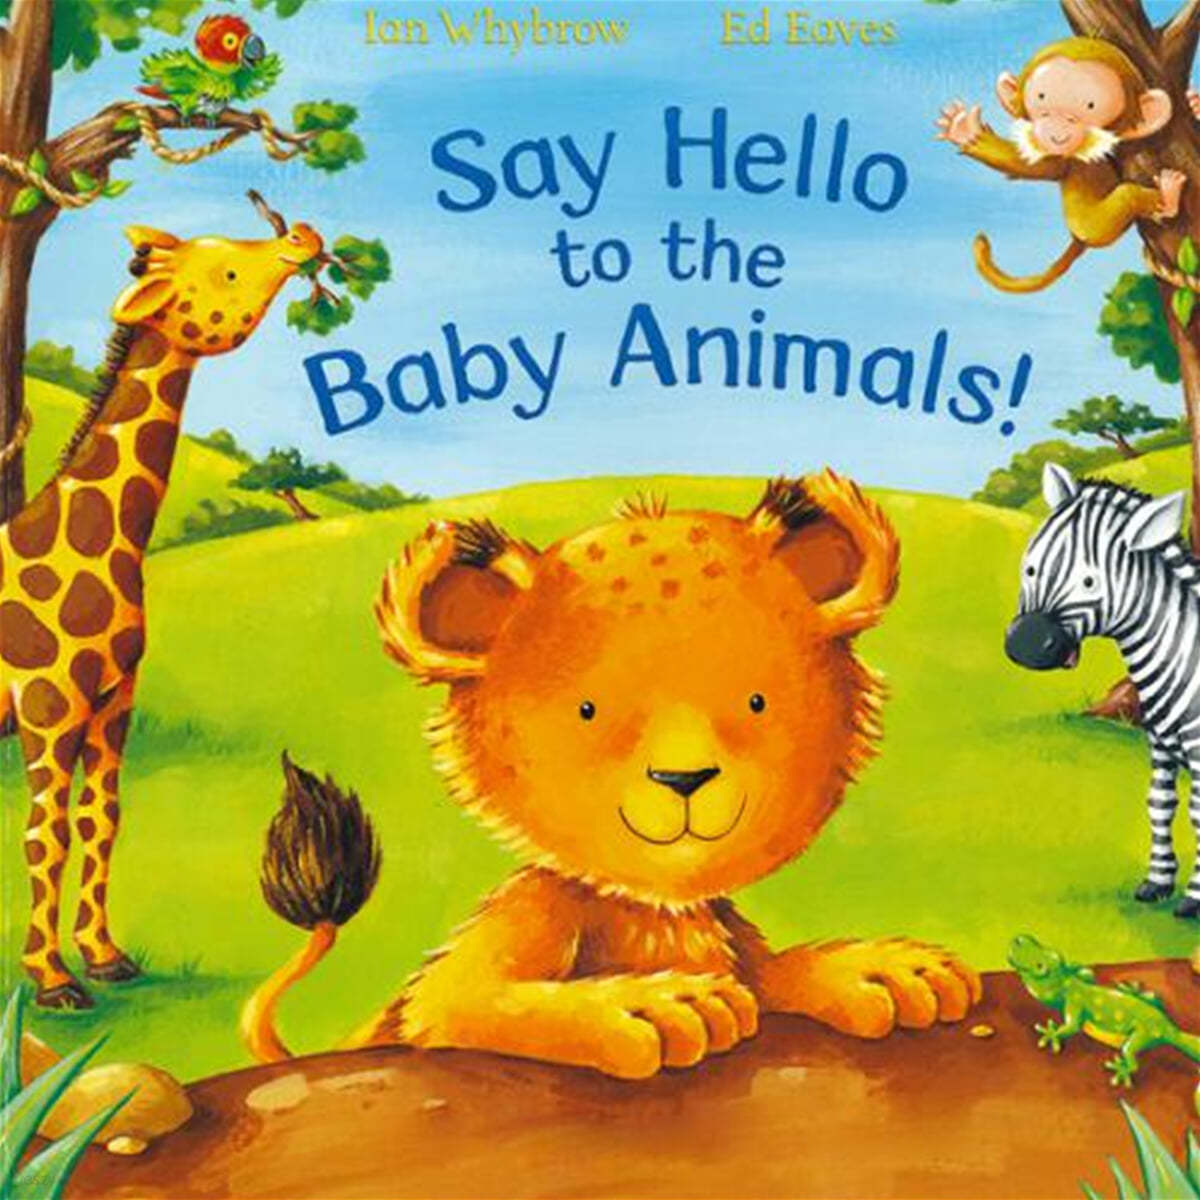 Say hello to the baby animals!